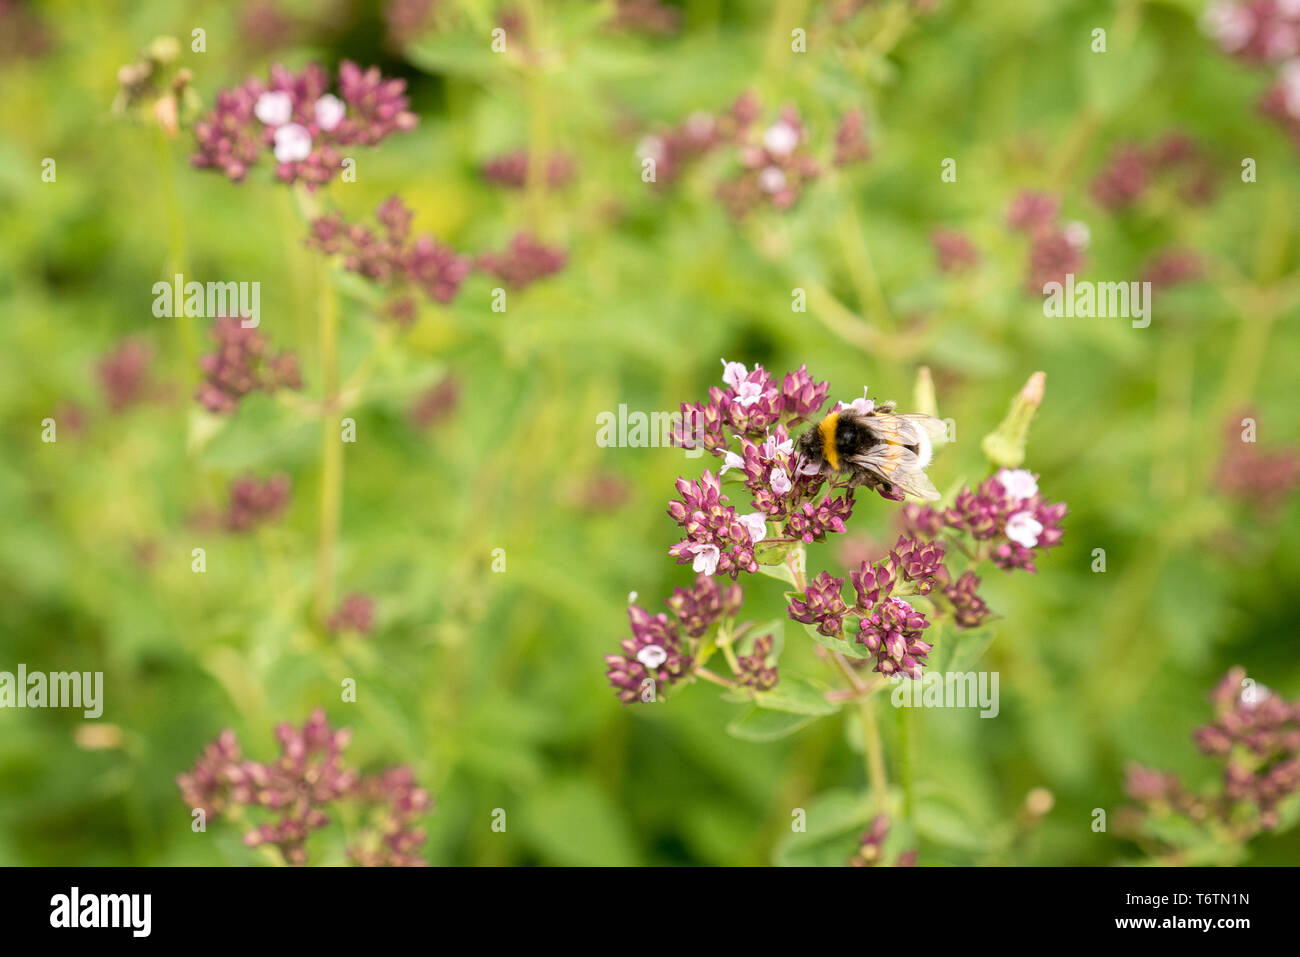 Bumblebee on a flower in a natural meadow Stock Photo